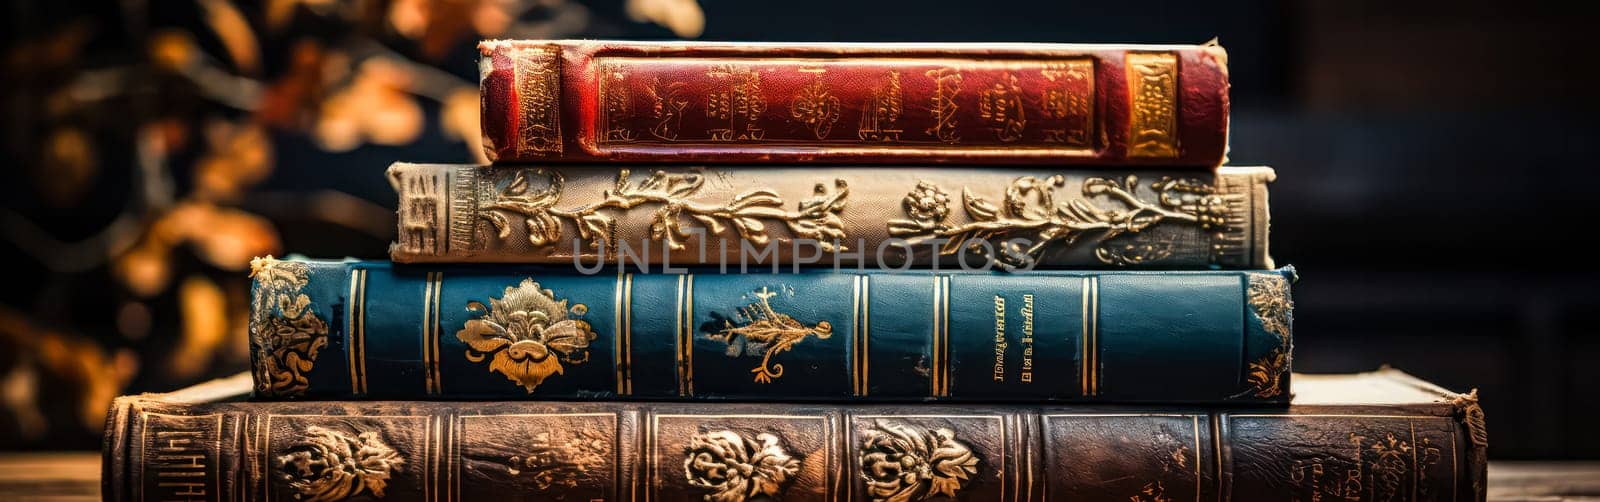 Close up view of antique books, showcasing their aged pages and intricate bindings, perfect for conveying a sense of nostalgia and literary charm.